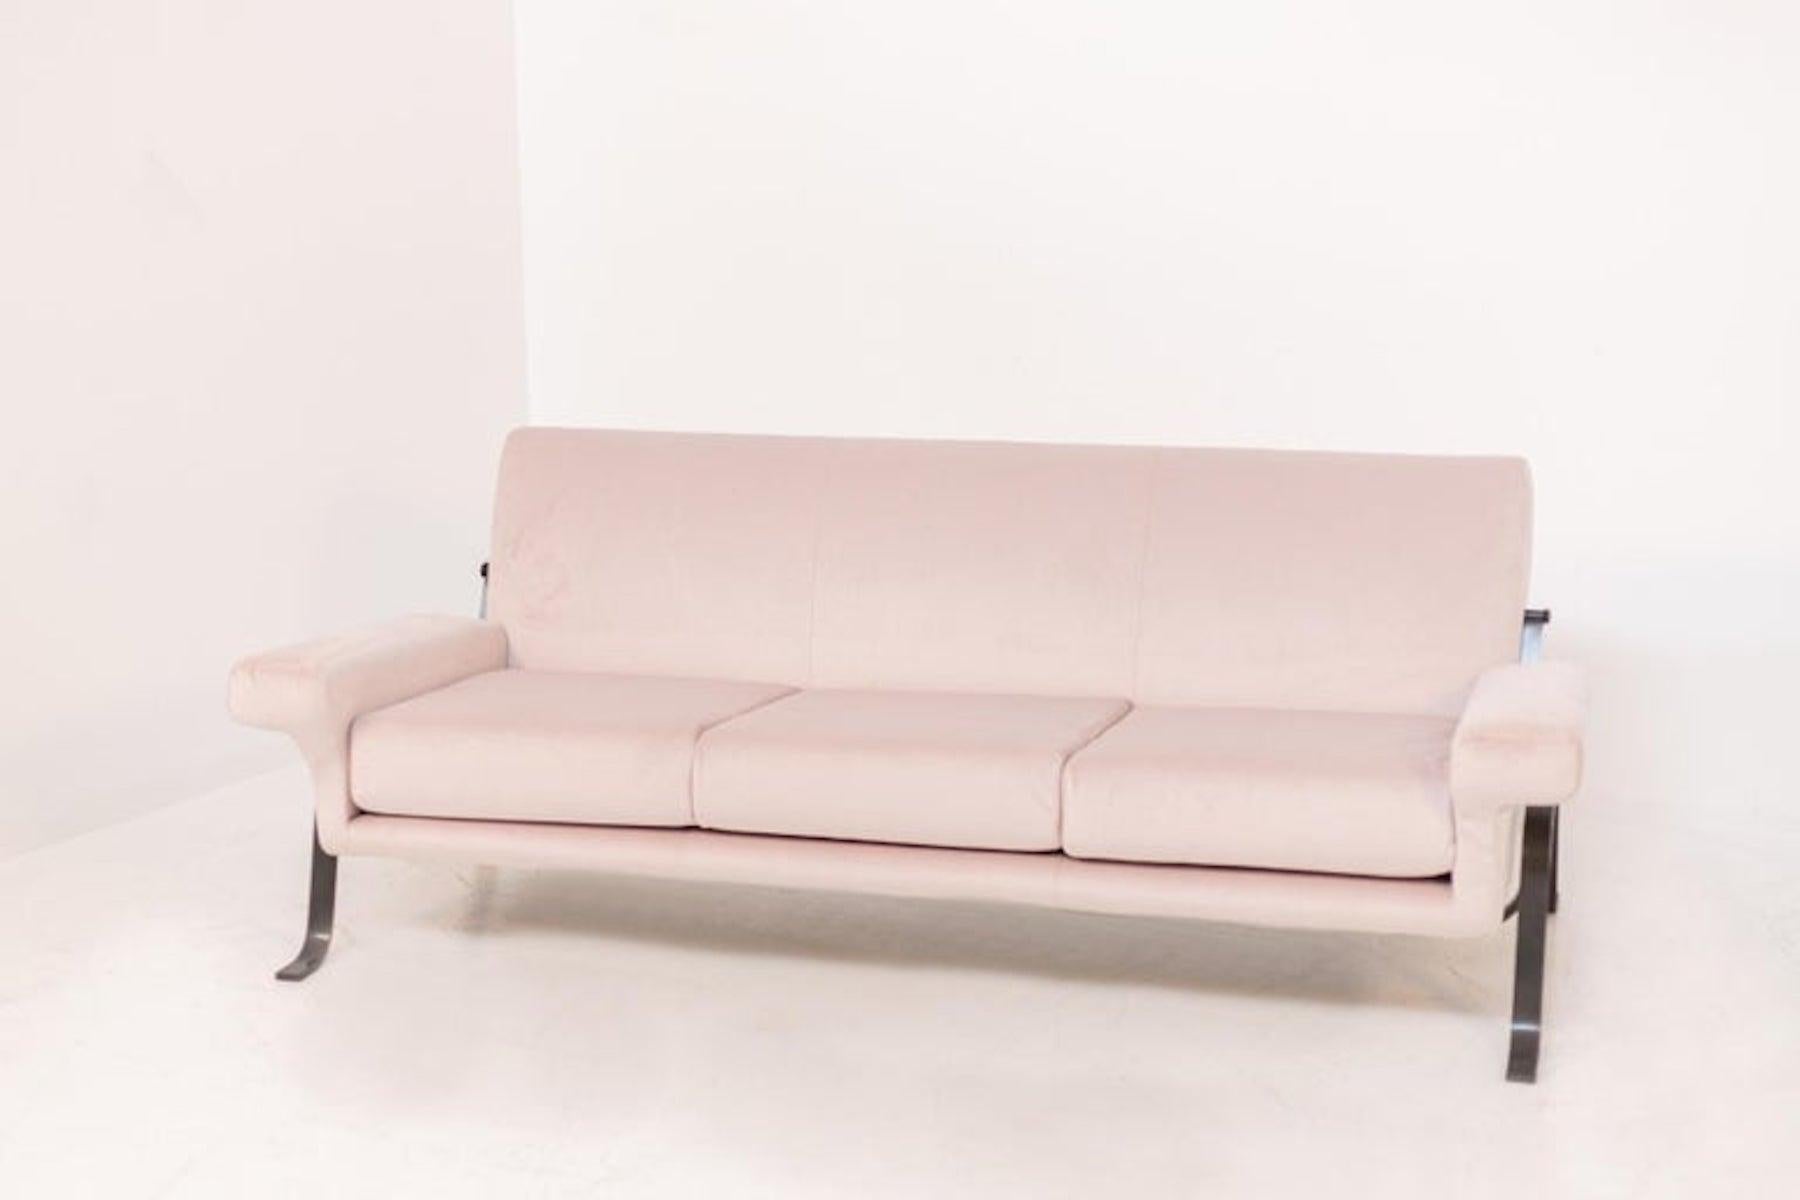 Rare three-seater sofa by Ignazio Gardella model 875 from the 1960s. Foam padding cut with sharp edges so that the furniture is dry and linear in shape. The structure is in metal, and the cover is an elegant pink velvet fabric. The sofa through the